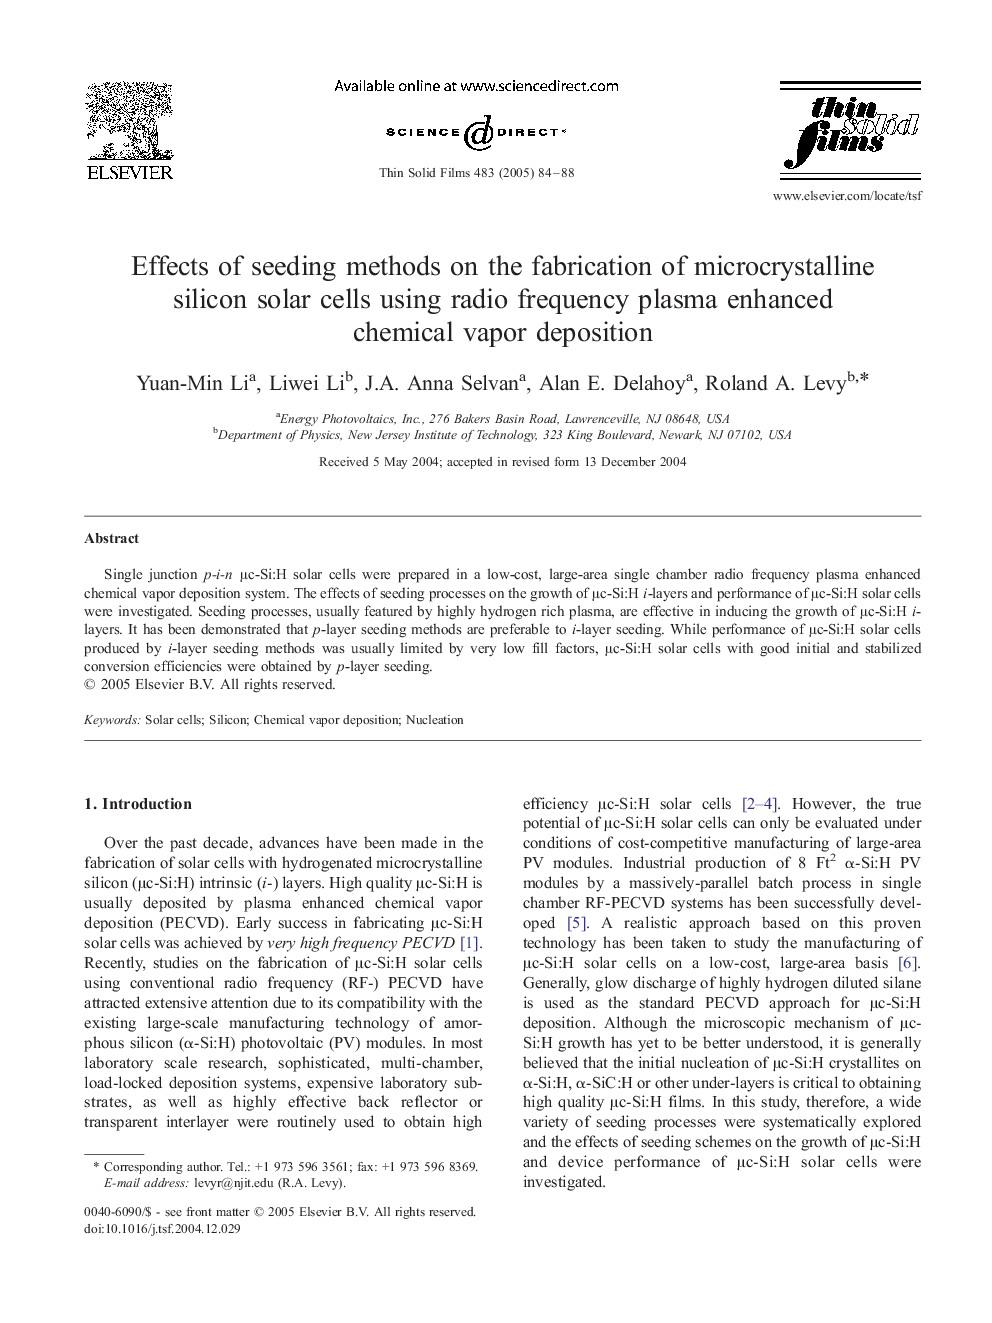 Effects of seeding methods on the fabrication of microcrystalline silicon solar cells using radio frequency plasma enhanced chemical vapor deposition